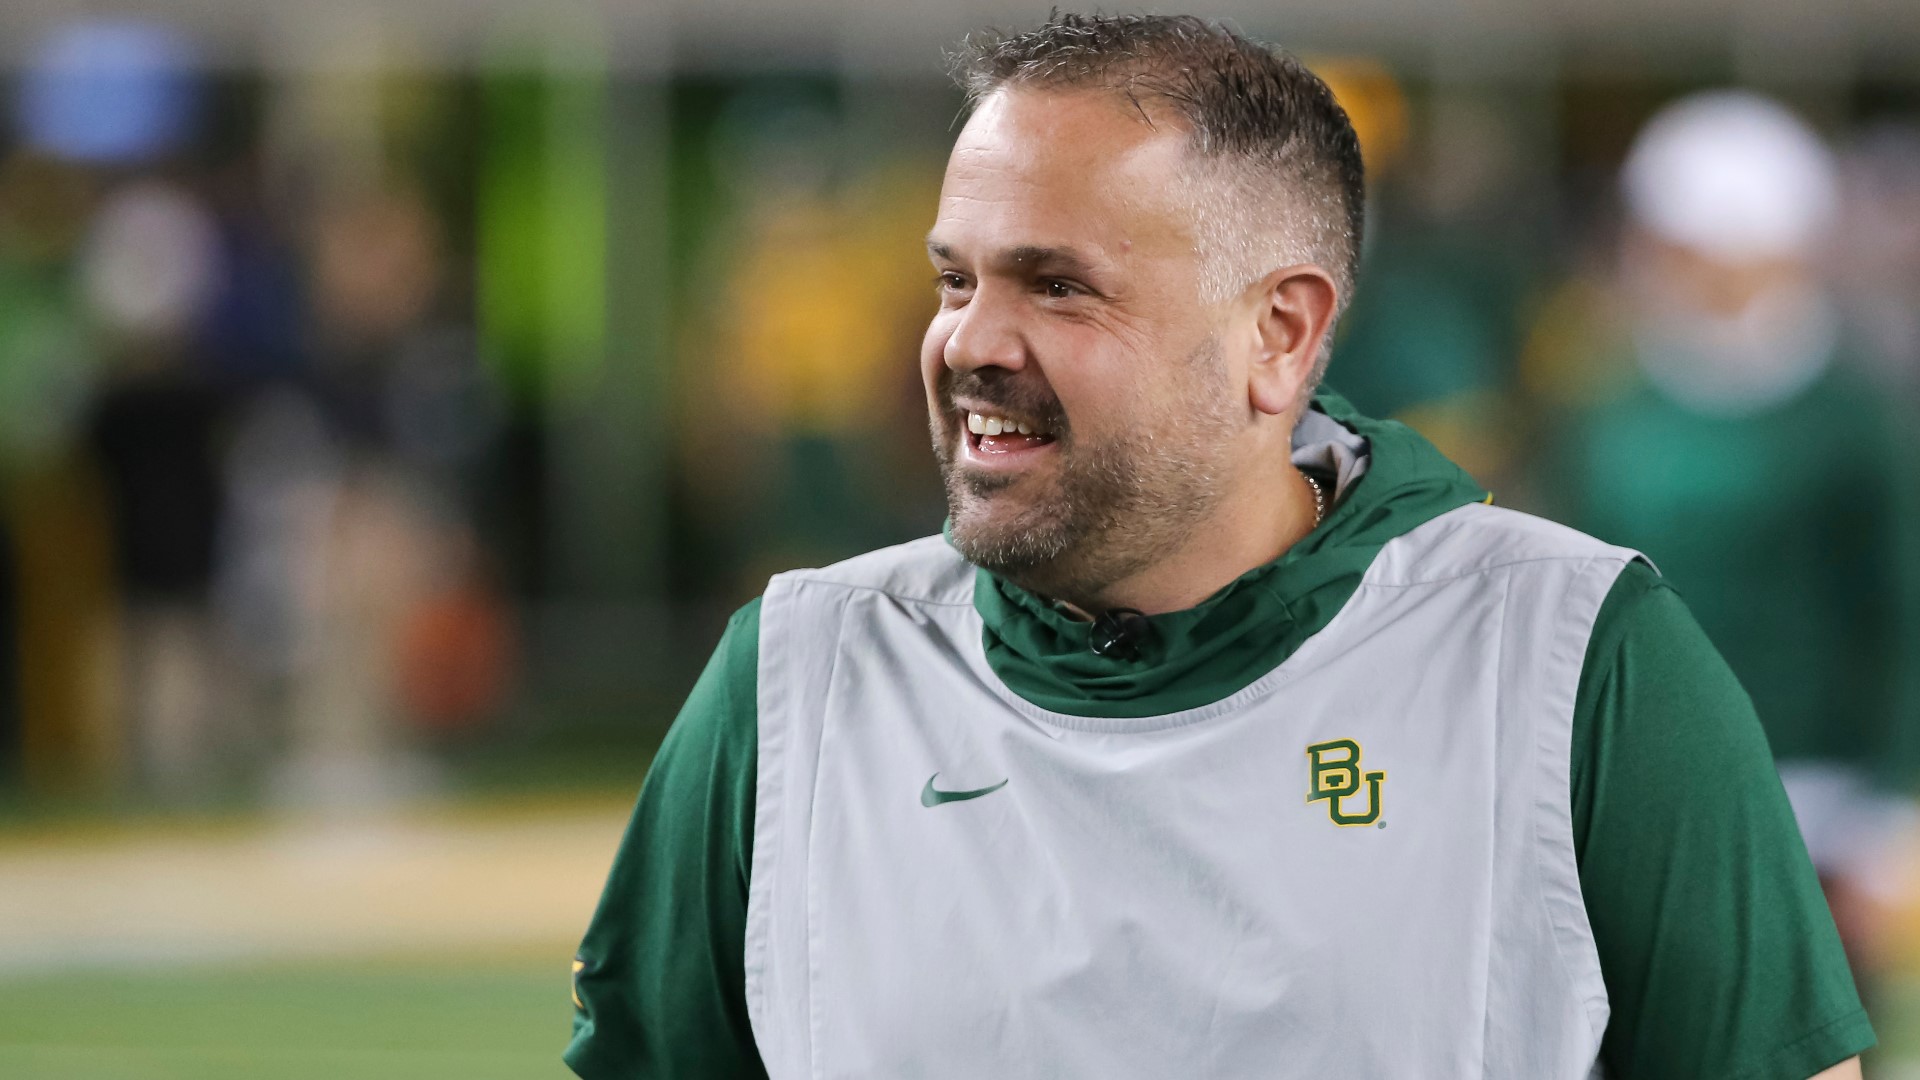 The Carolina Panthers are finalizing a deal to hire Baylor University head coach Matt Rhule as the team's next coach, NBC Charlotte's Ashley Stroehlein has learned.